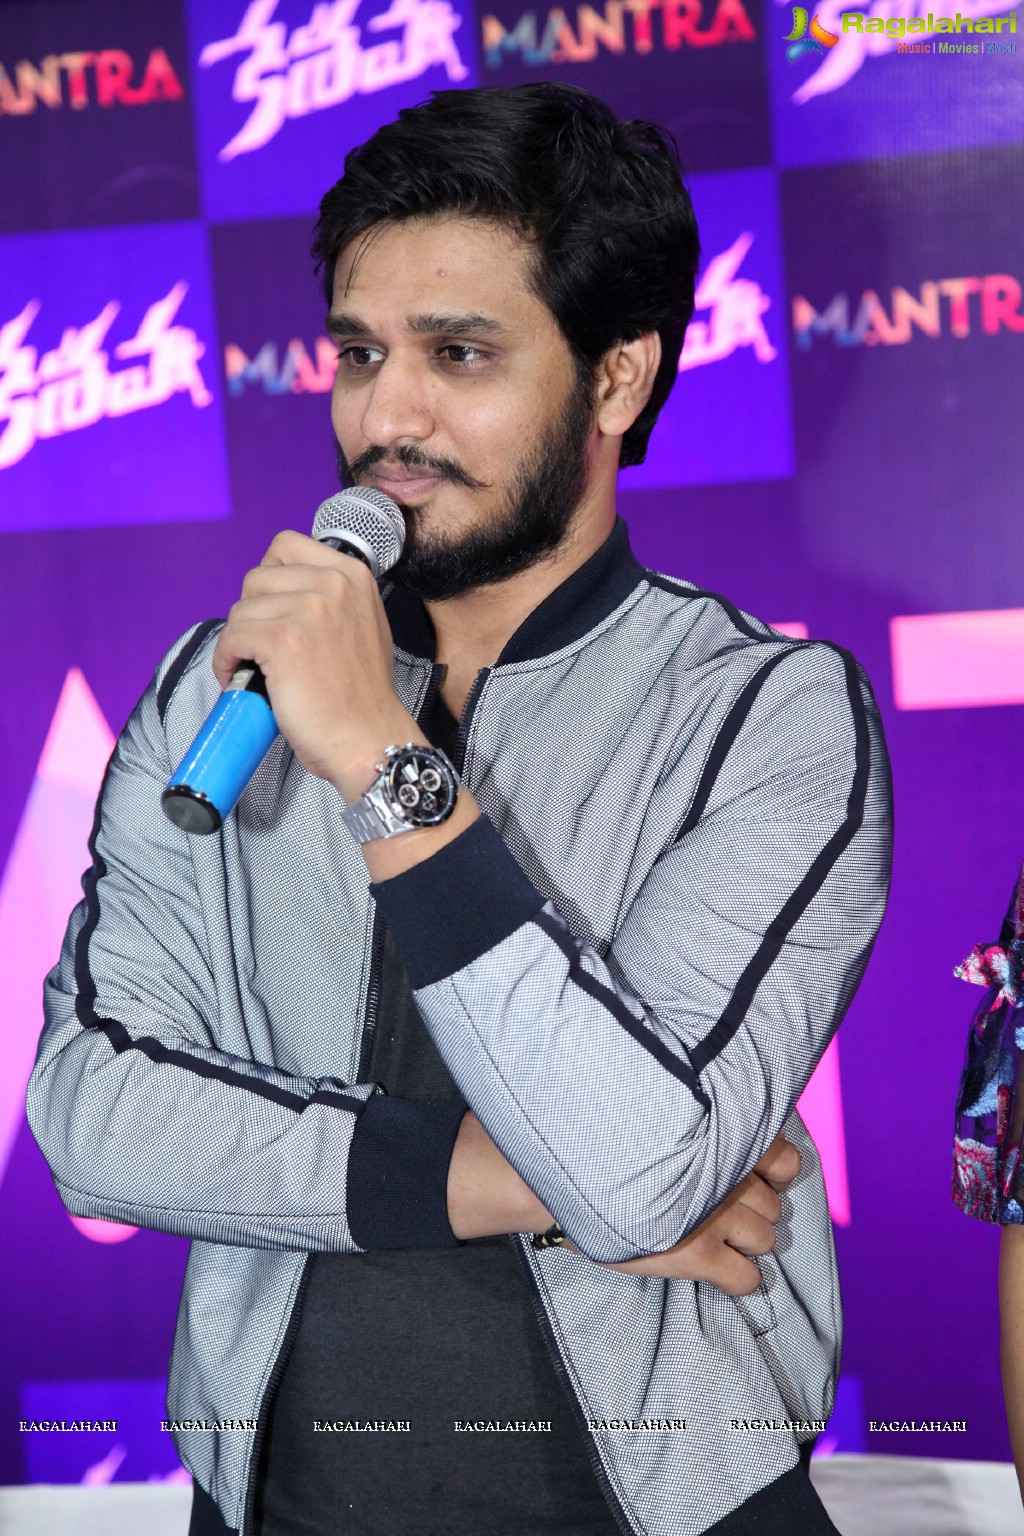 Fun Event with Nikhil and Ritu Varma at Mantra Mall, Hyderabad